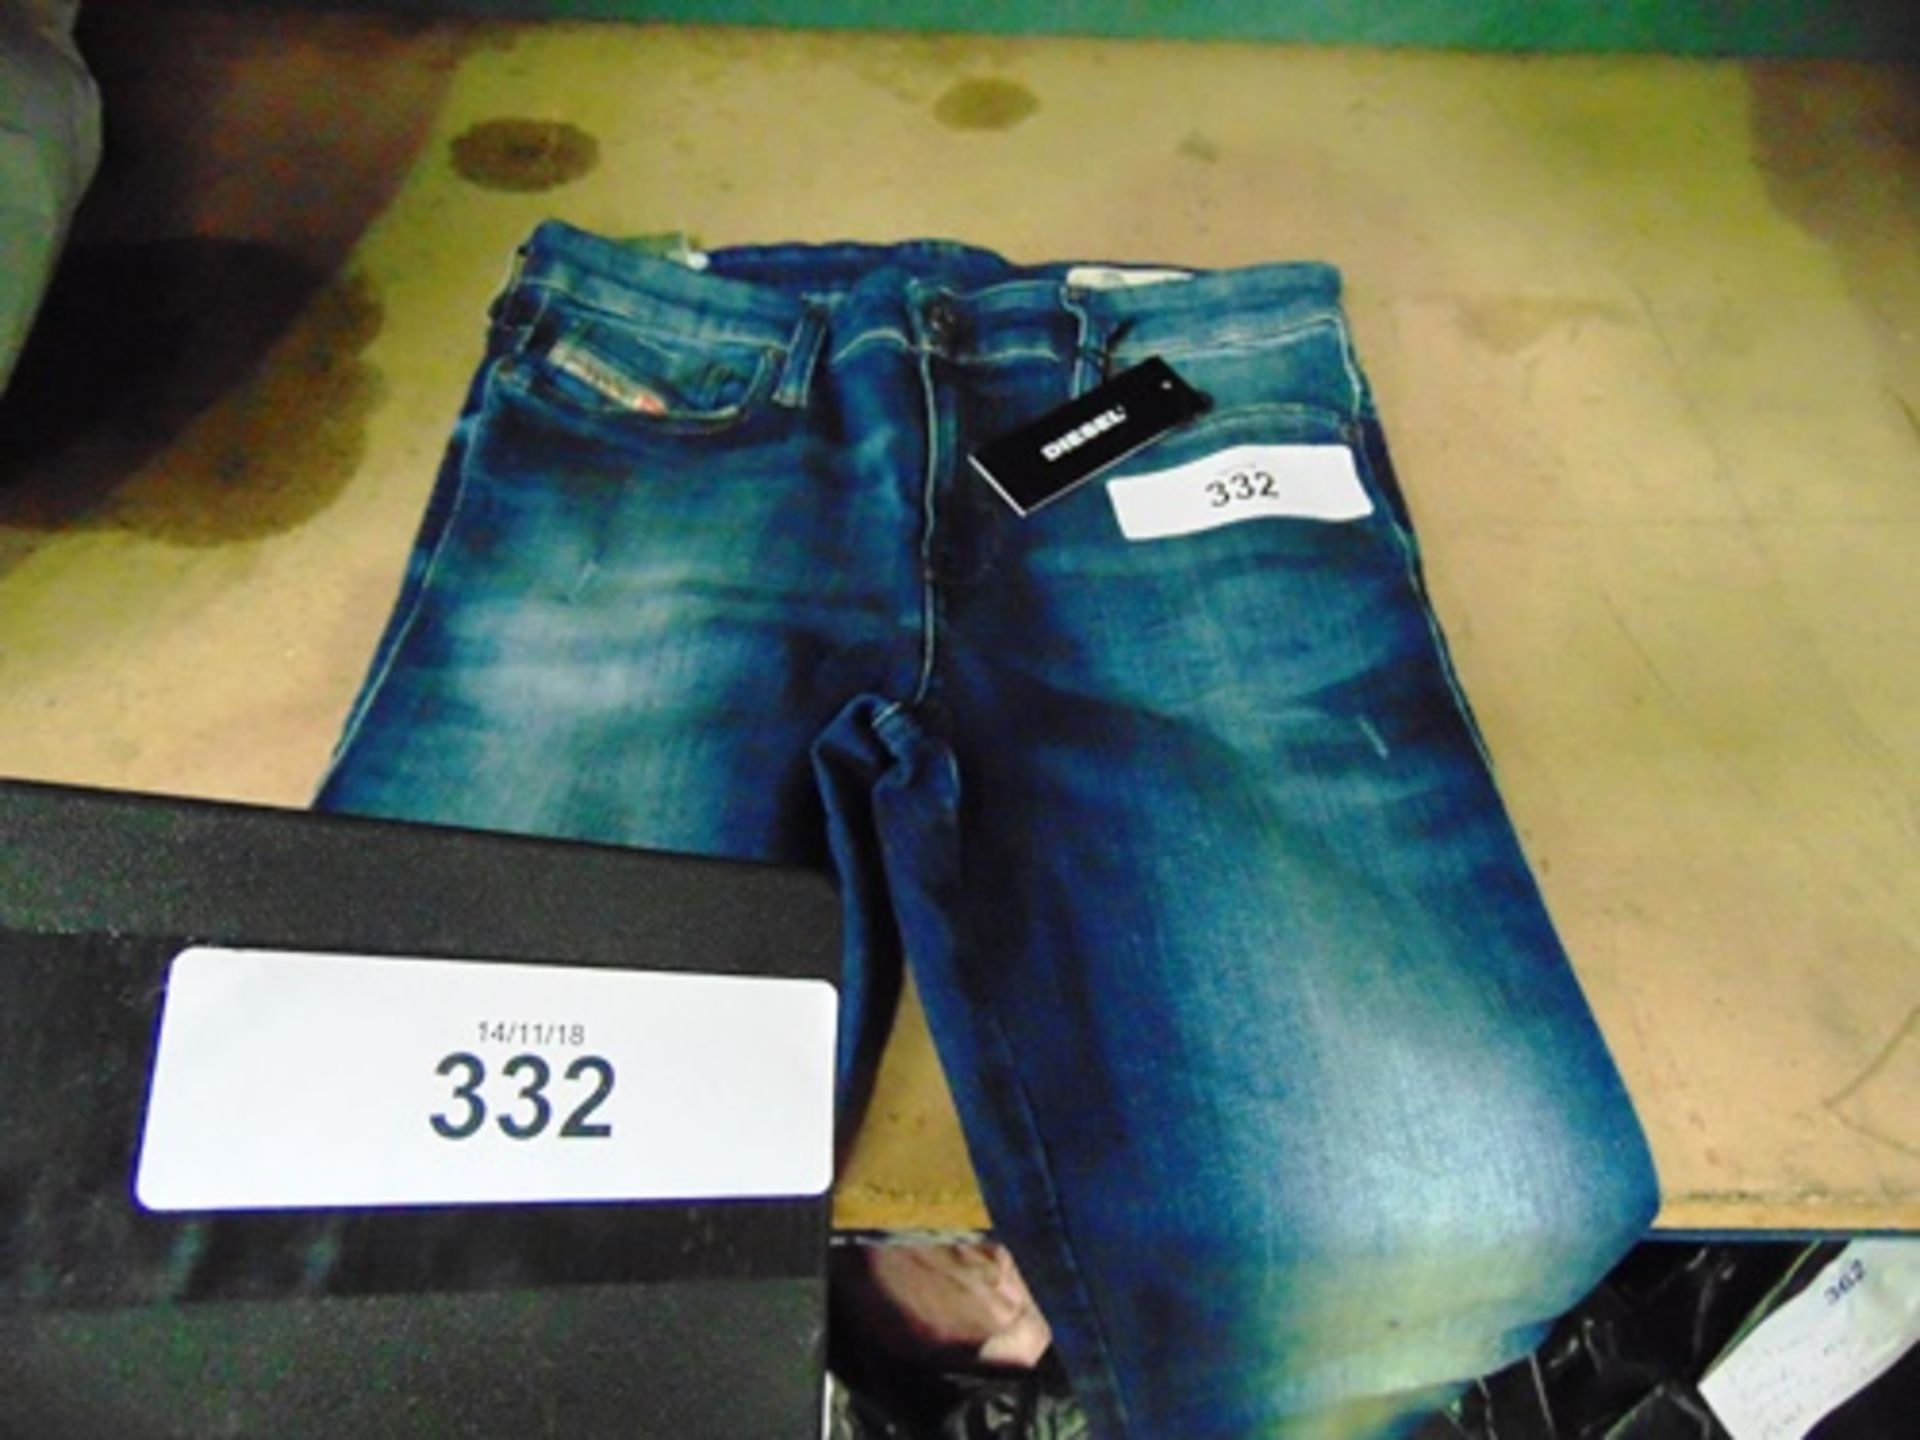 1 x pair of Diesel skinzee L32 trousers, size 28, length 32, RRP £100.00 - New with tags (CC2)